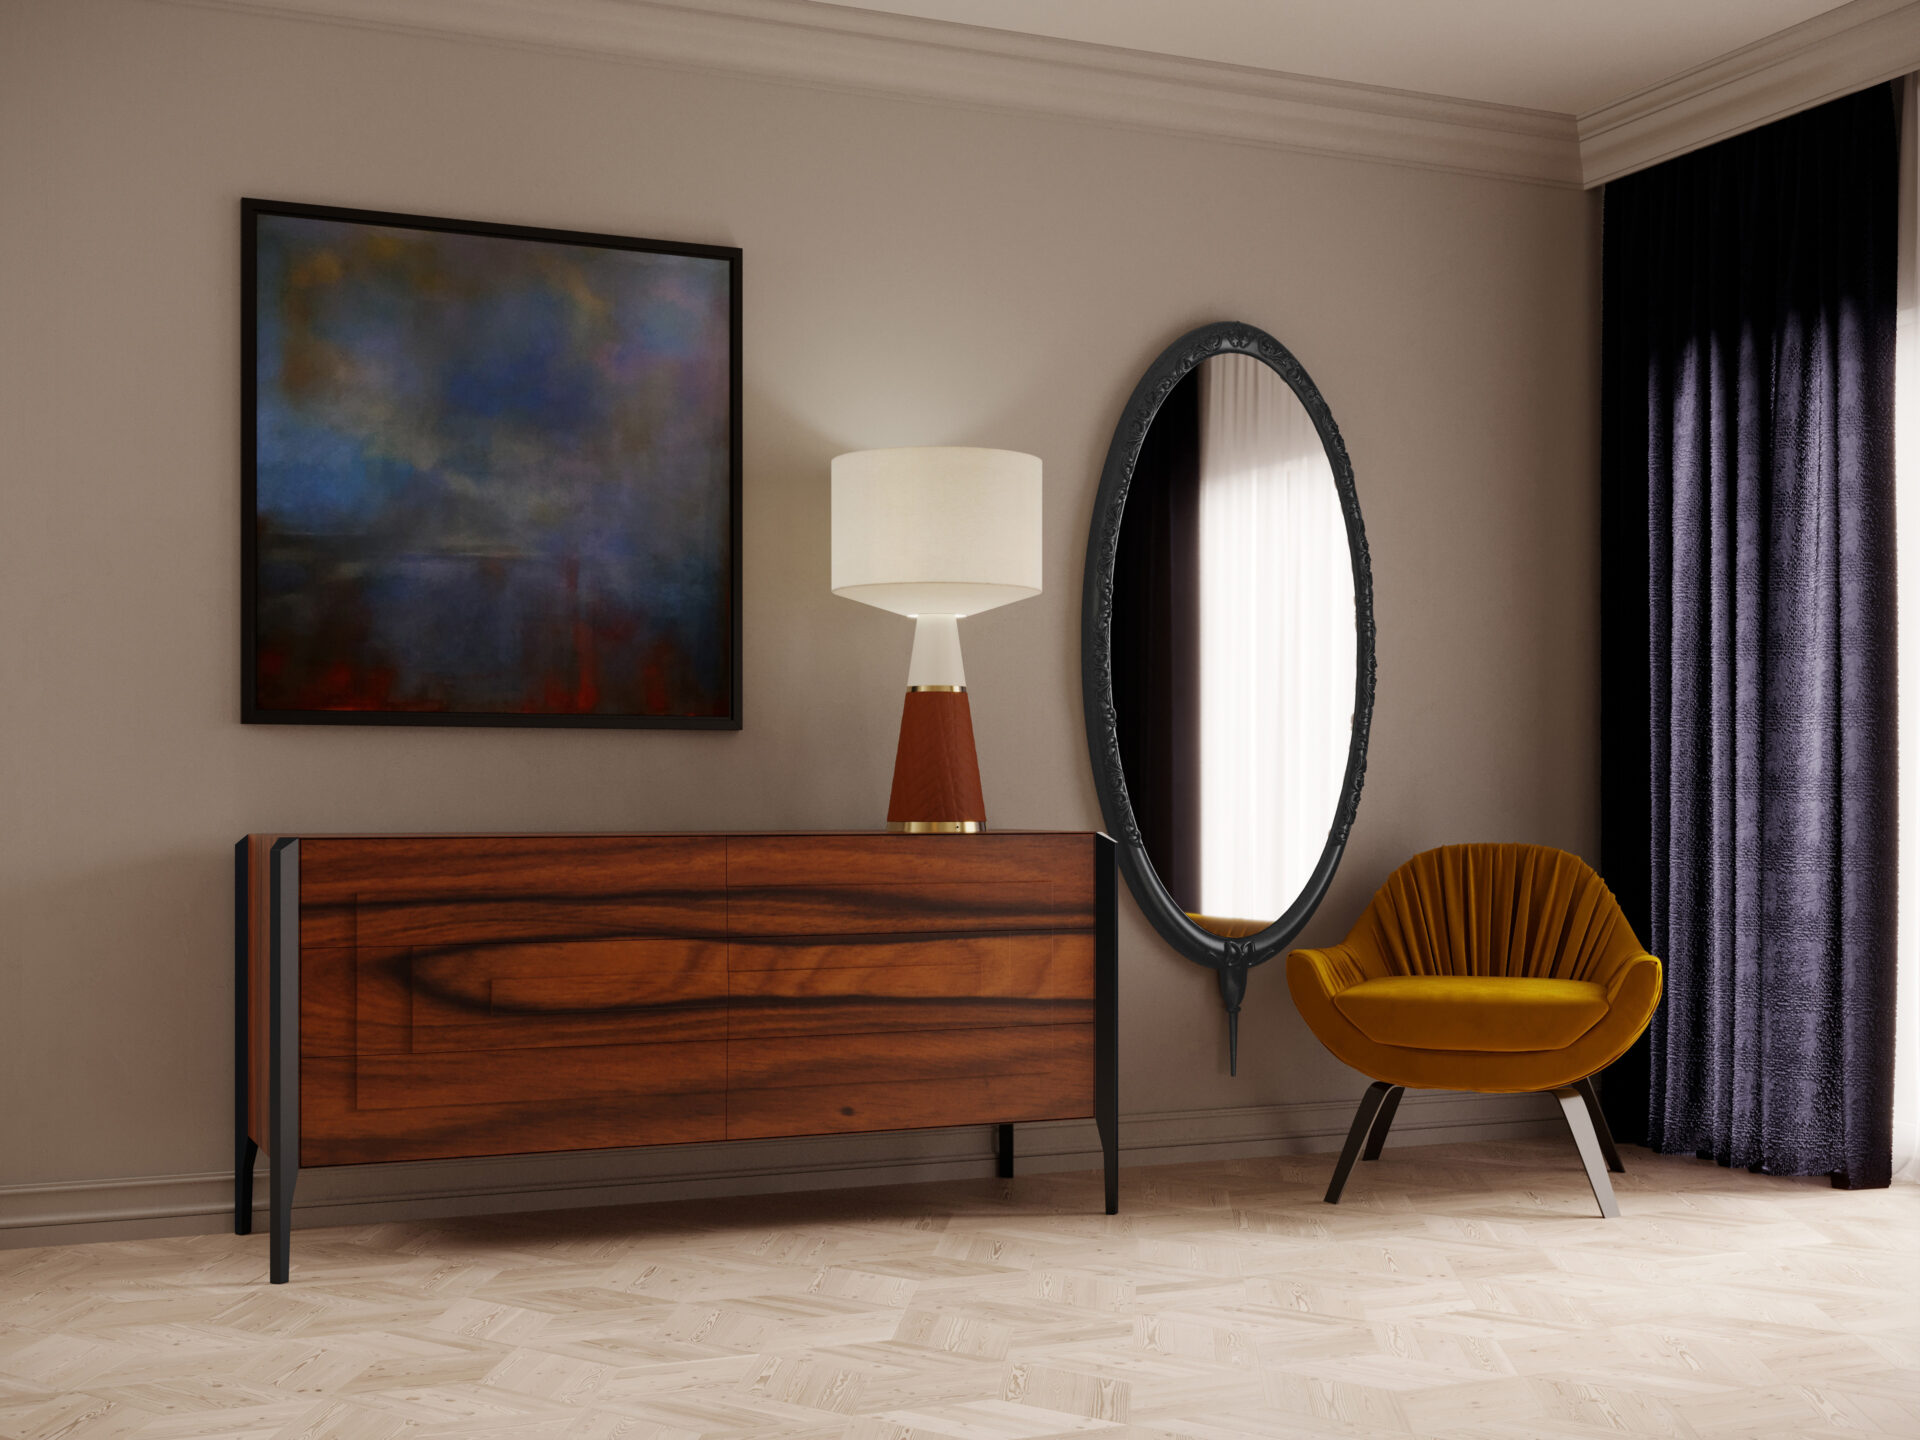 Image Description: Oval decorative mirror with a worked frame in a small bedroom.